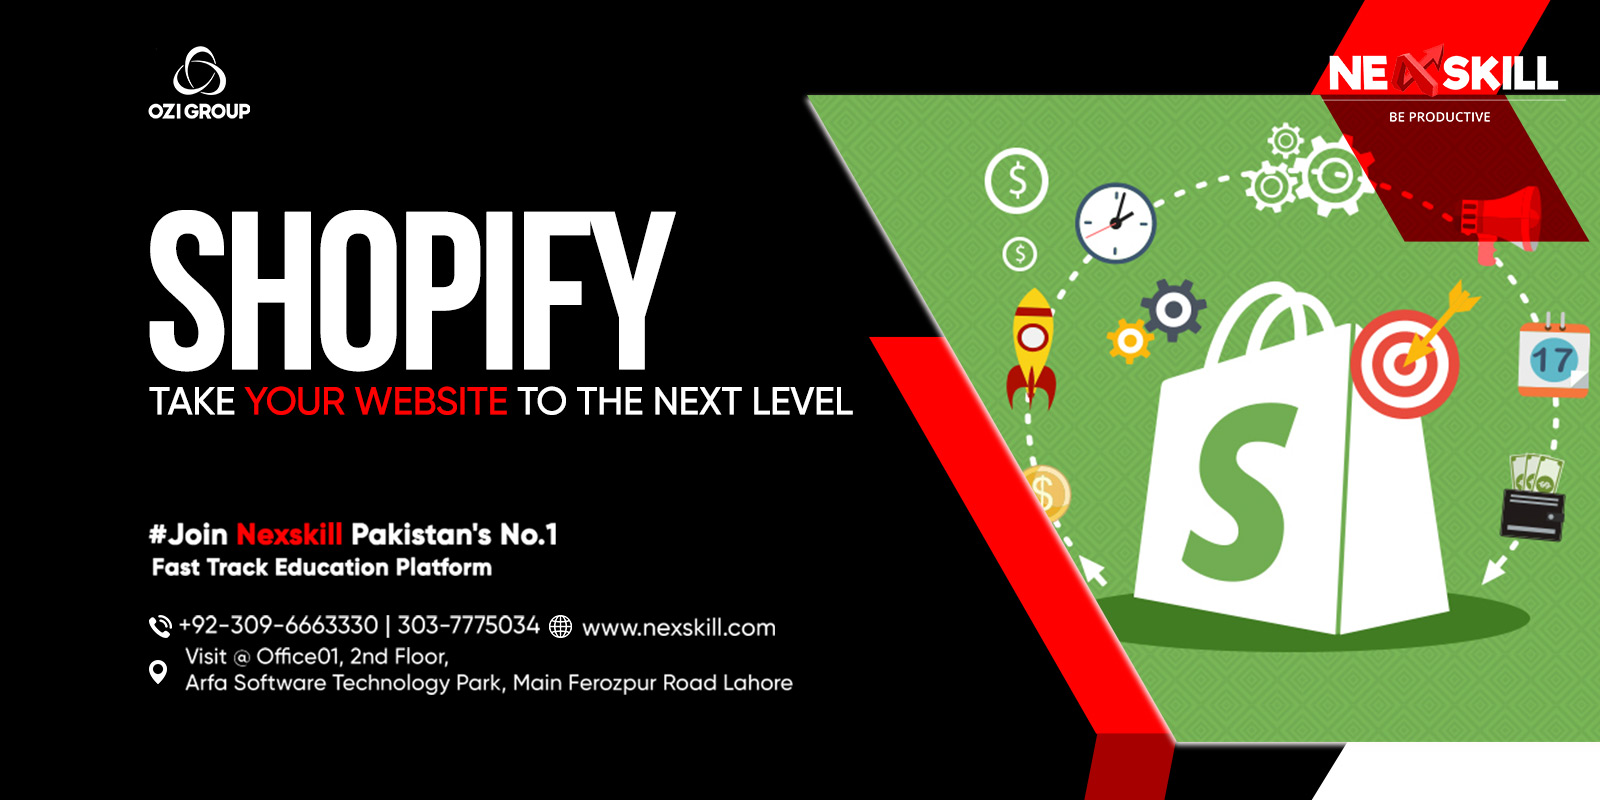 Shopify: Take Your Website to the Next Level